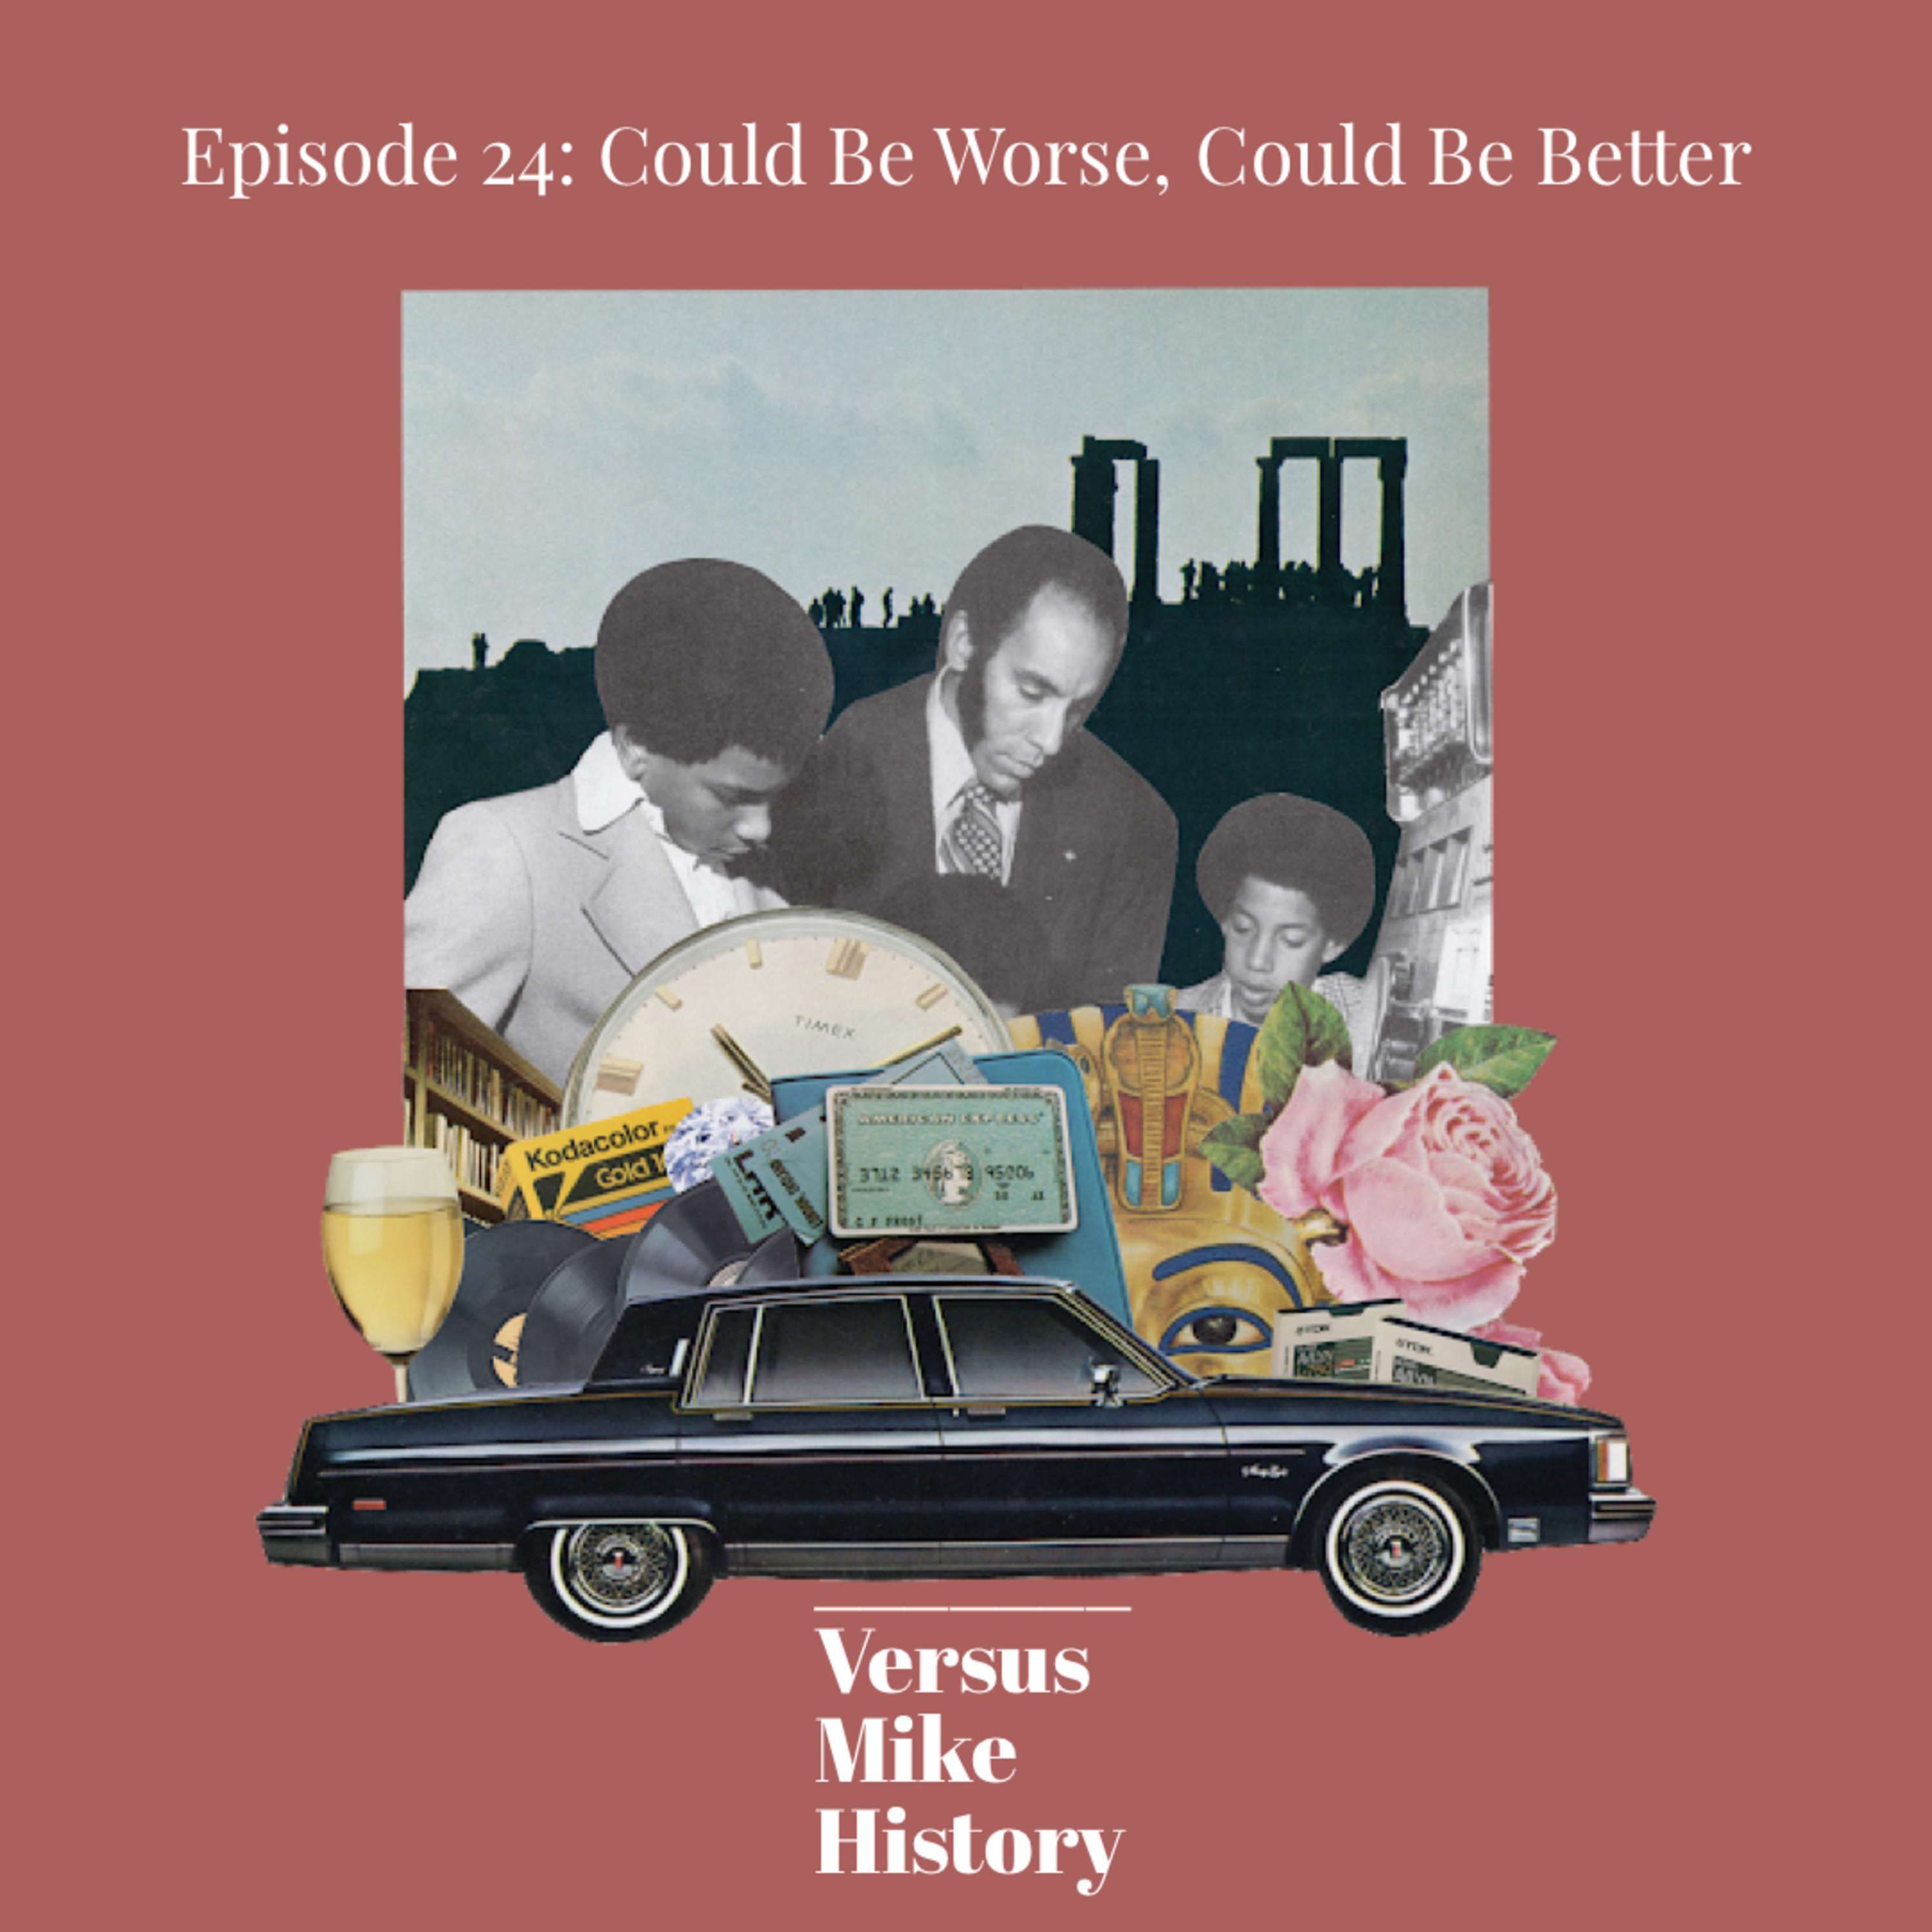 Episode 24: Could Be Worse, Could Be Better